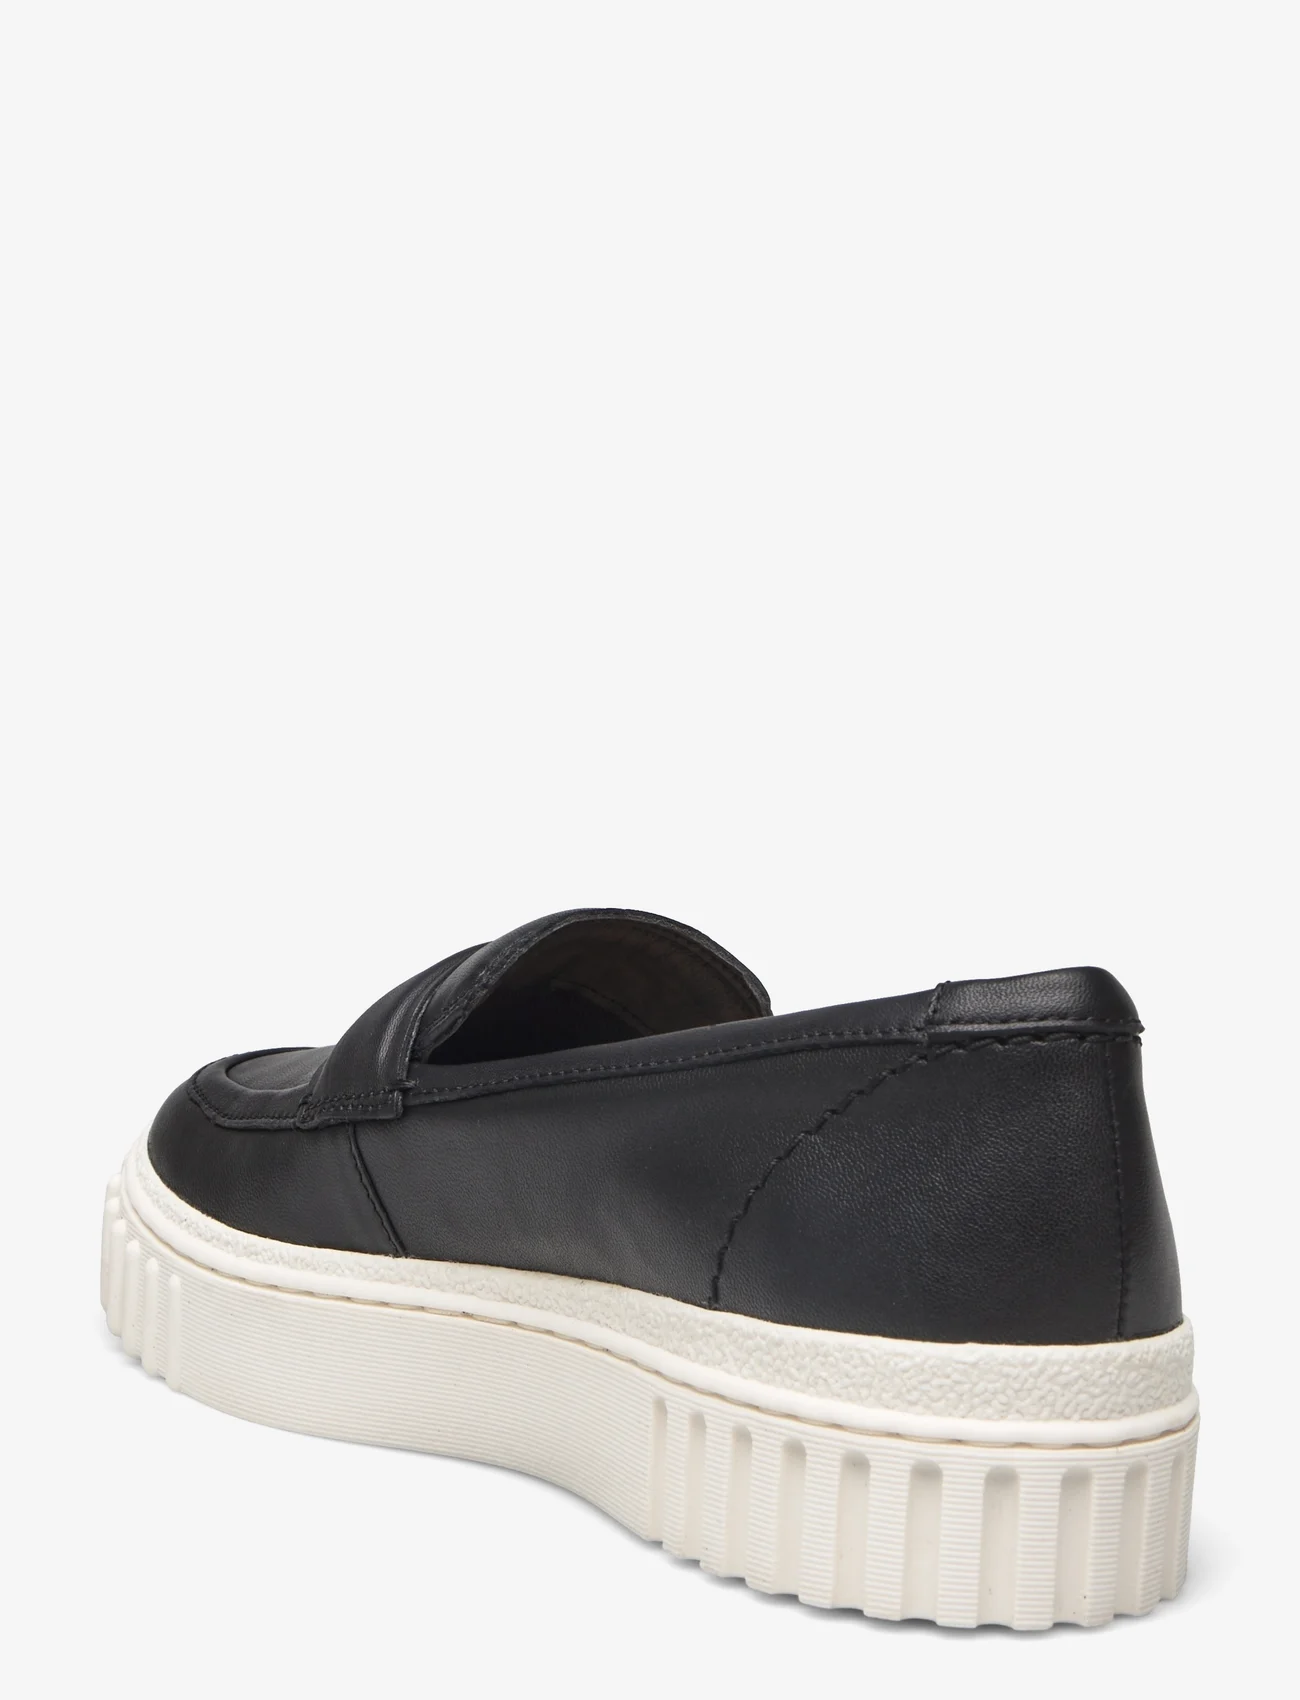 Clarks - Mayhill Cove D - gimtadienio dovanos - 1216 black leather - 1